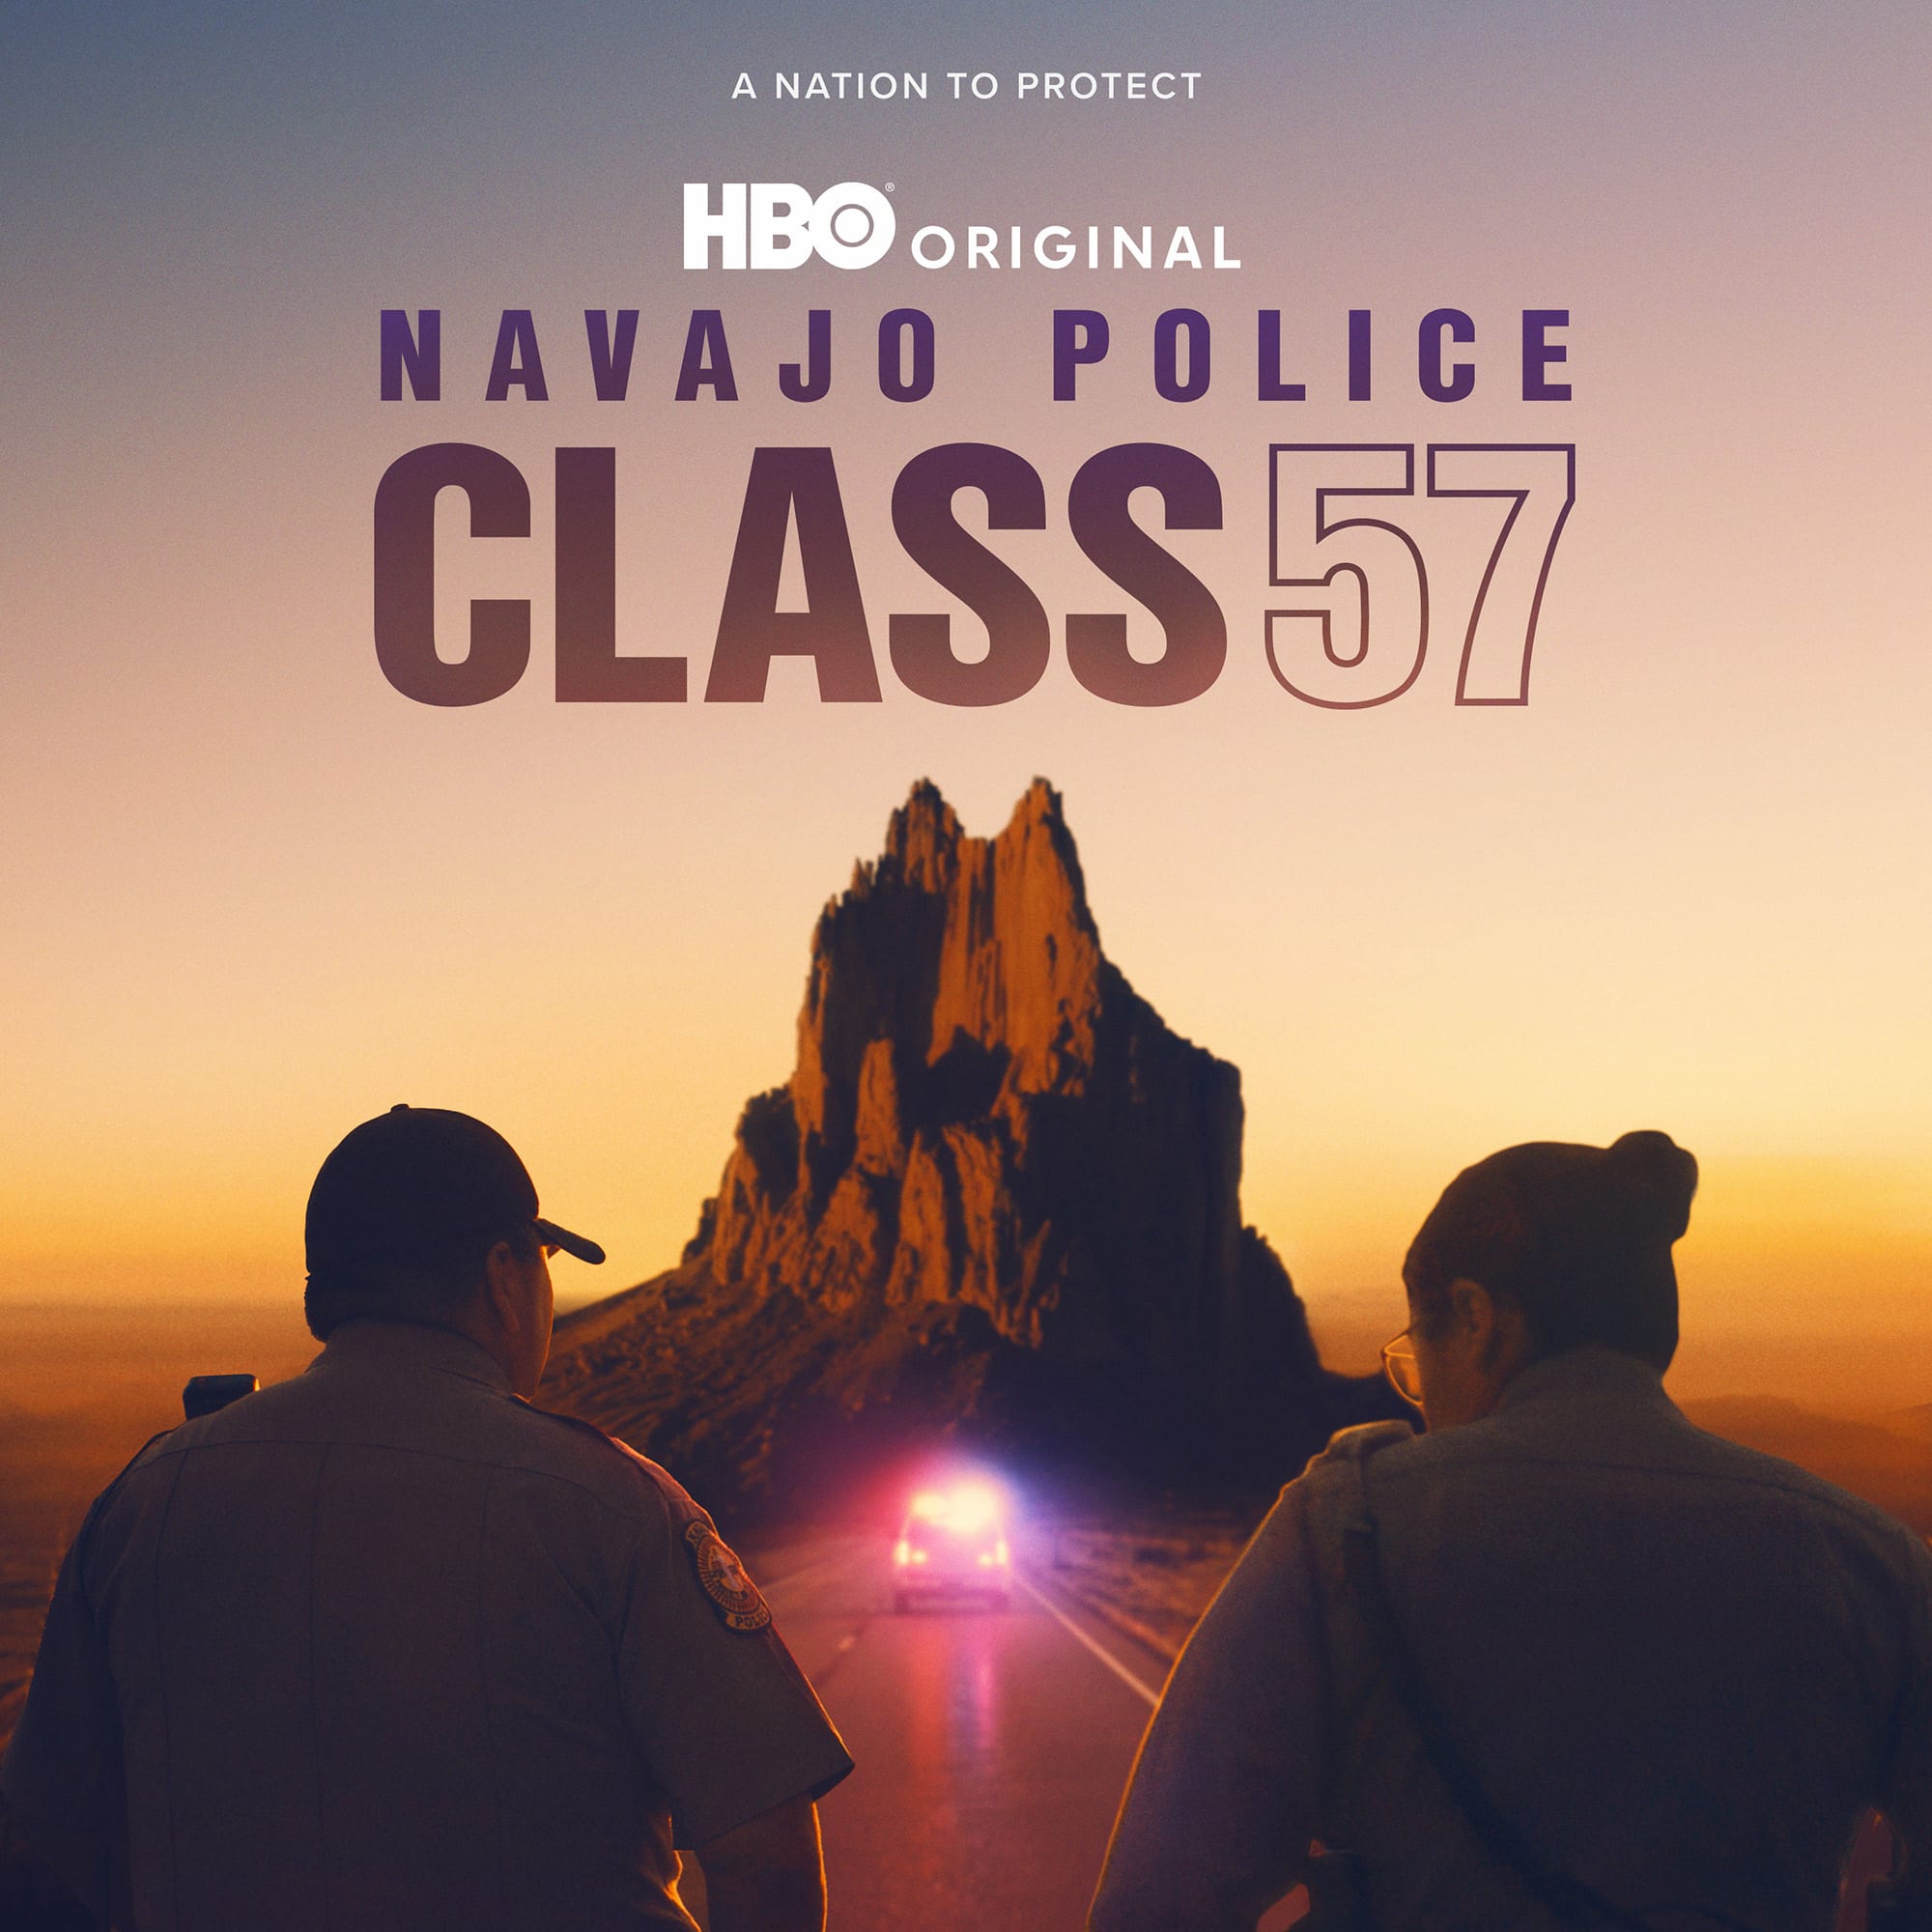 Behind the Scenes with Navajo Police: Class 57 Creator and IAIA Faculty Kahlil Hudson